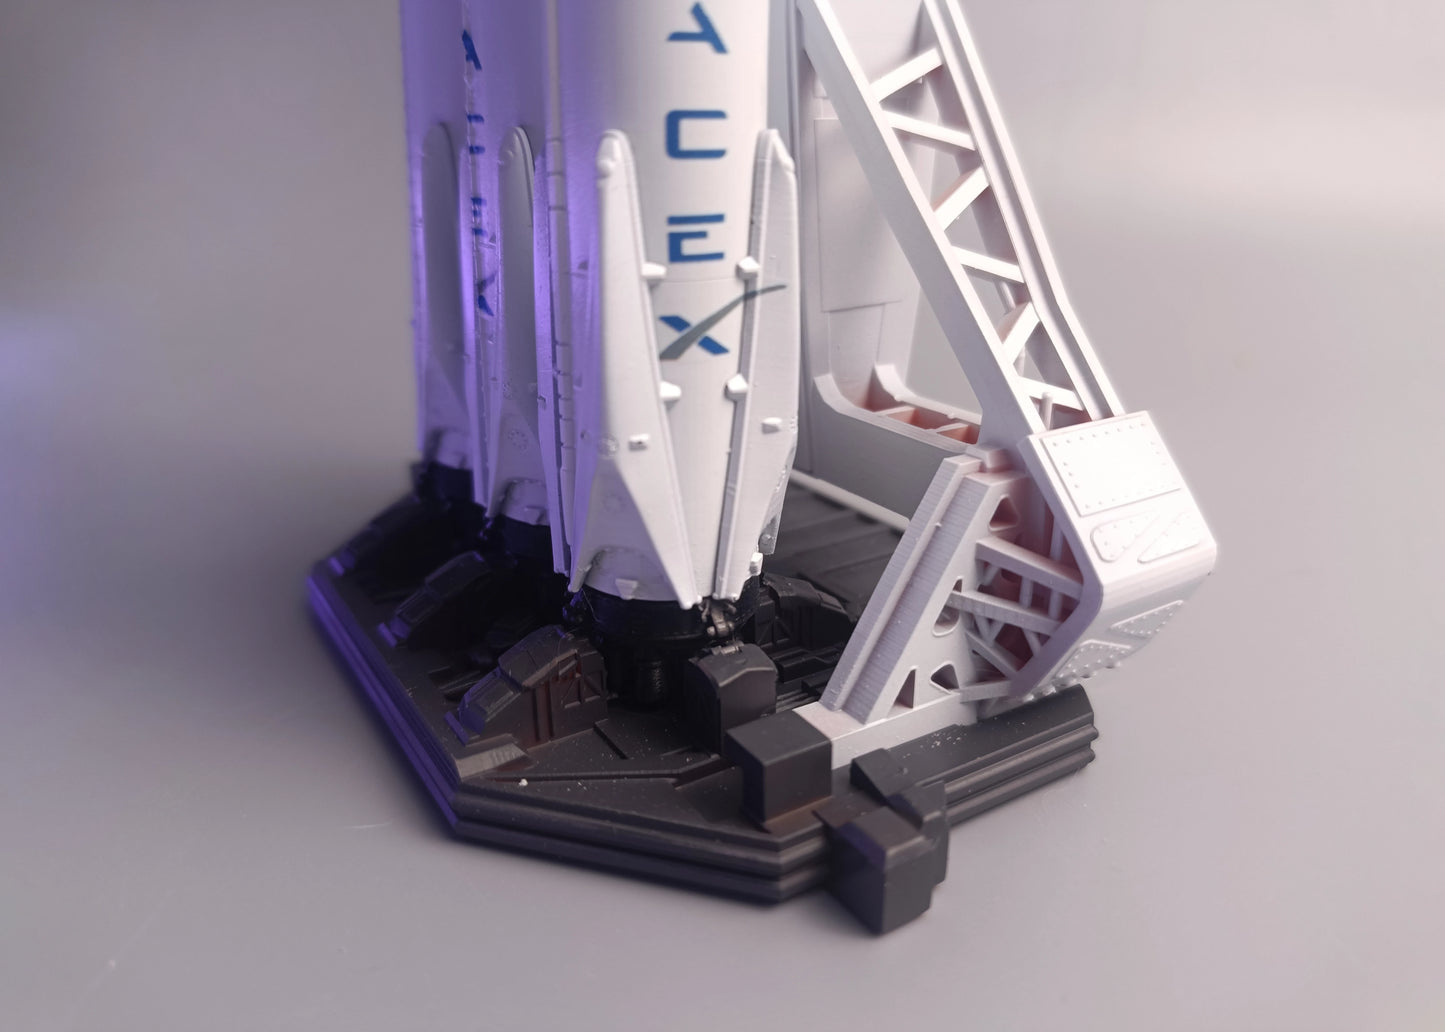 Landing legs and detailed launch table base for Falcon Heavy rocket by SpaceX in 1:200 scale